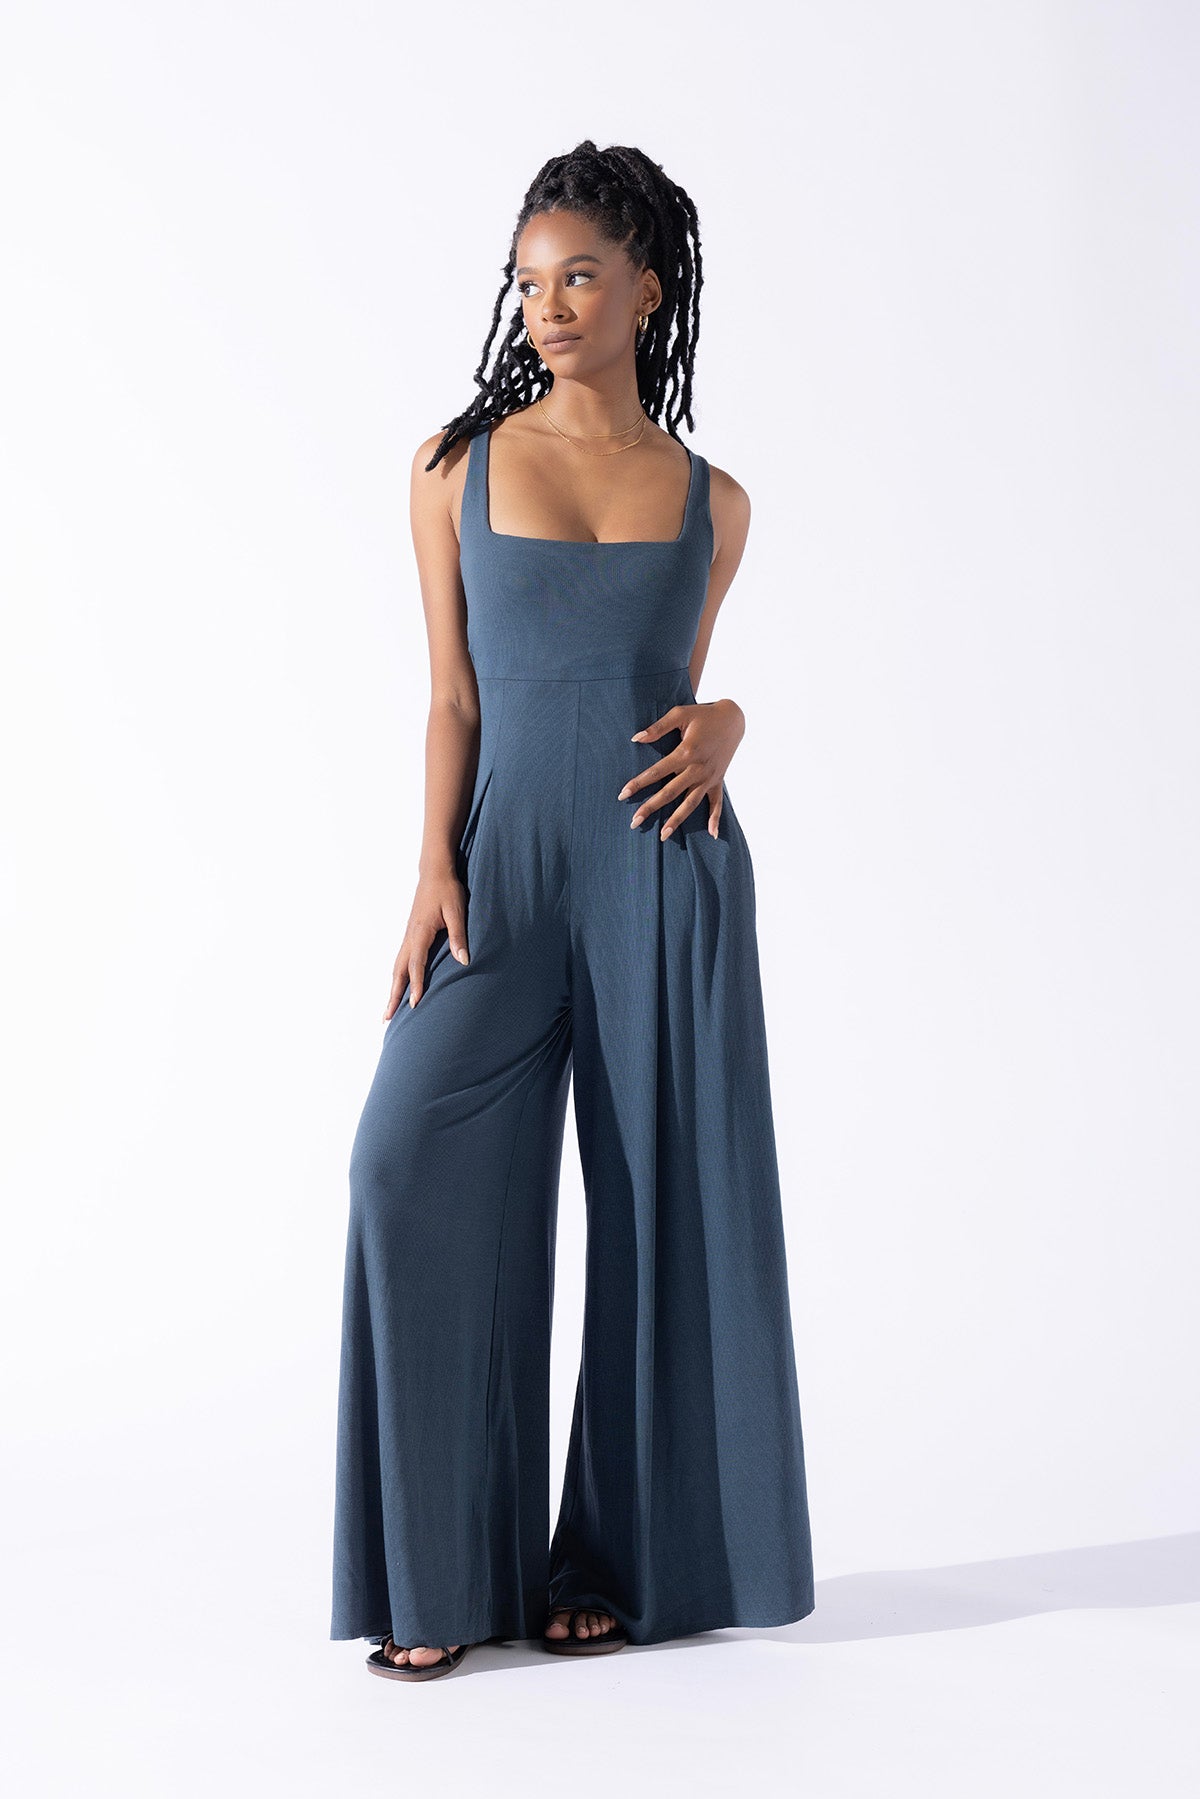 Go with the Flow Jumpsuit - Stormy Weather